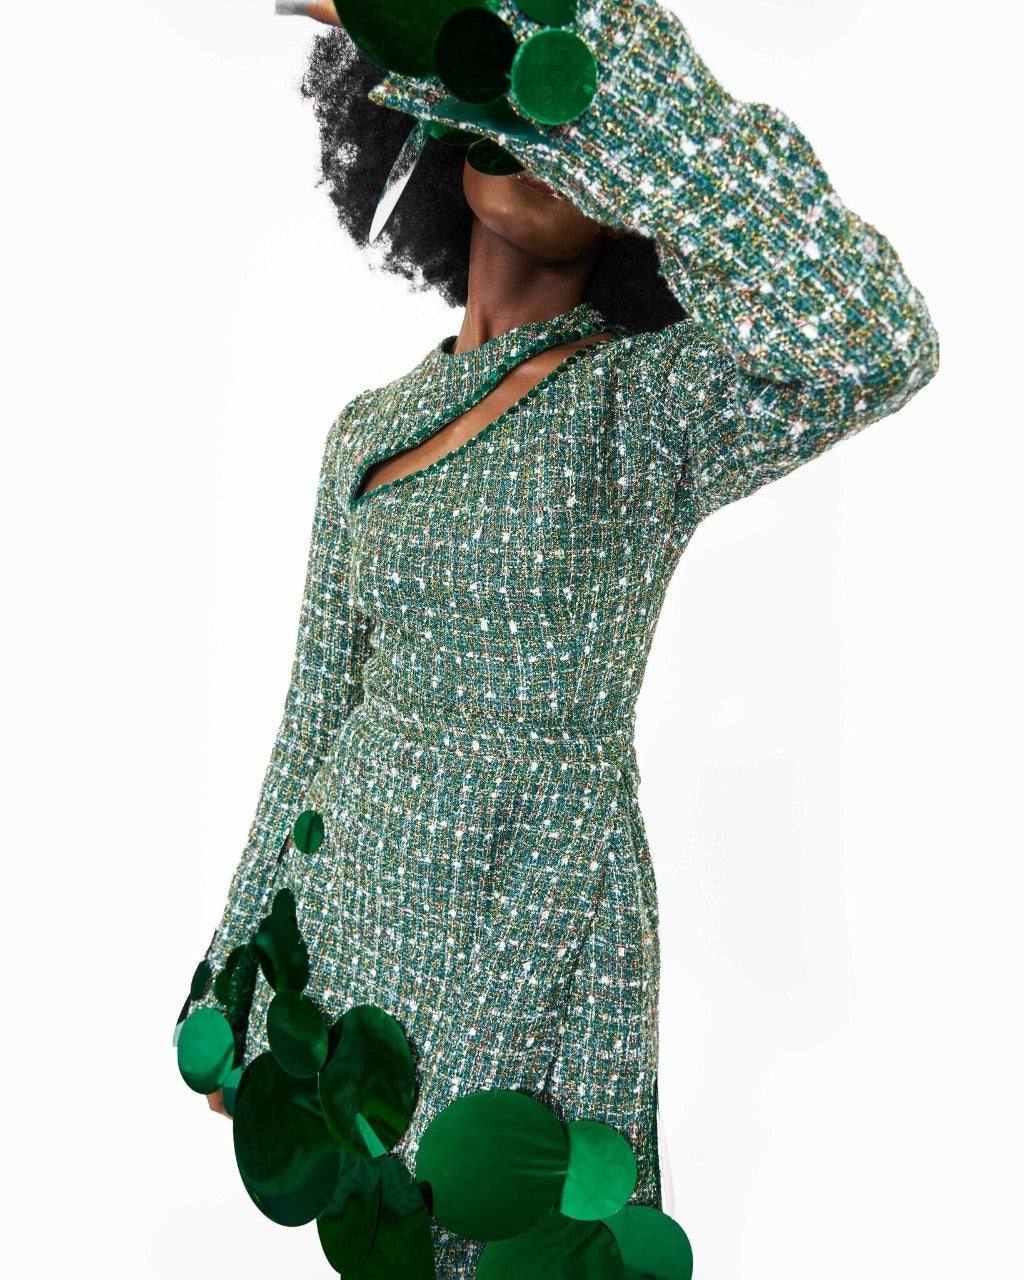 A model wearing a Green top with cut-out neckline detail and sequins embellishment at the neckline and sleeve hem and a Green high waist mini skirt with sequins embellishment